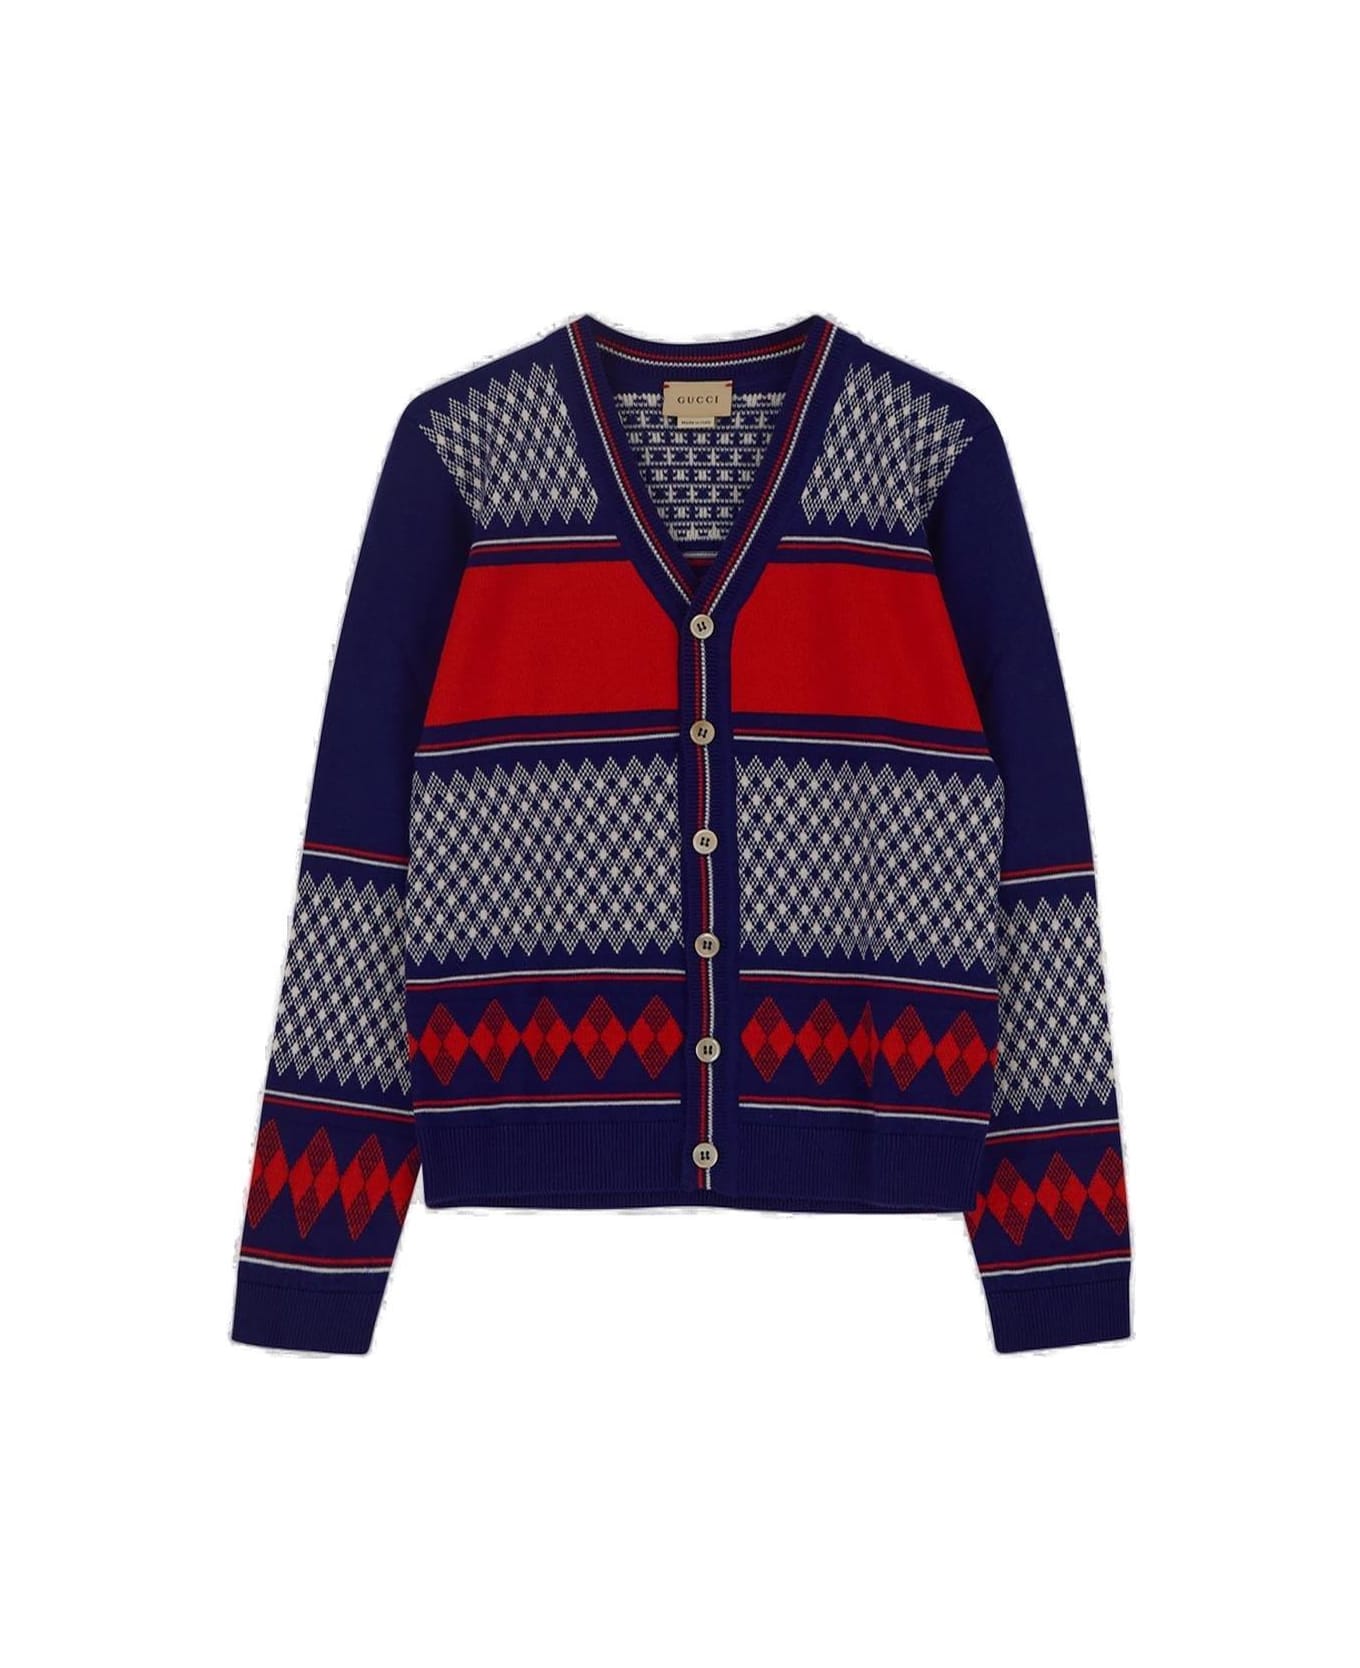 Gucci V-neck Long-sleeved Cardigan - Blue and red